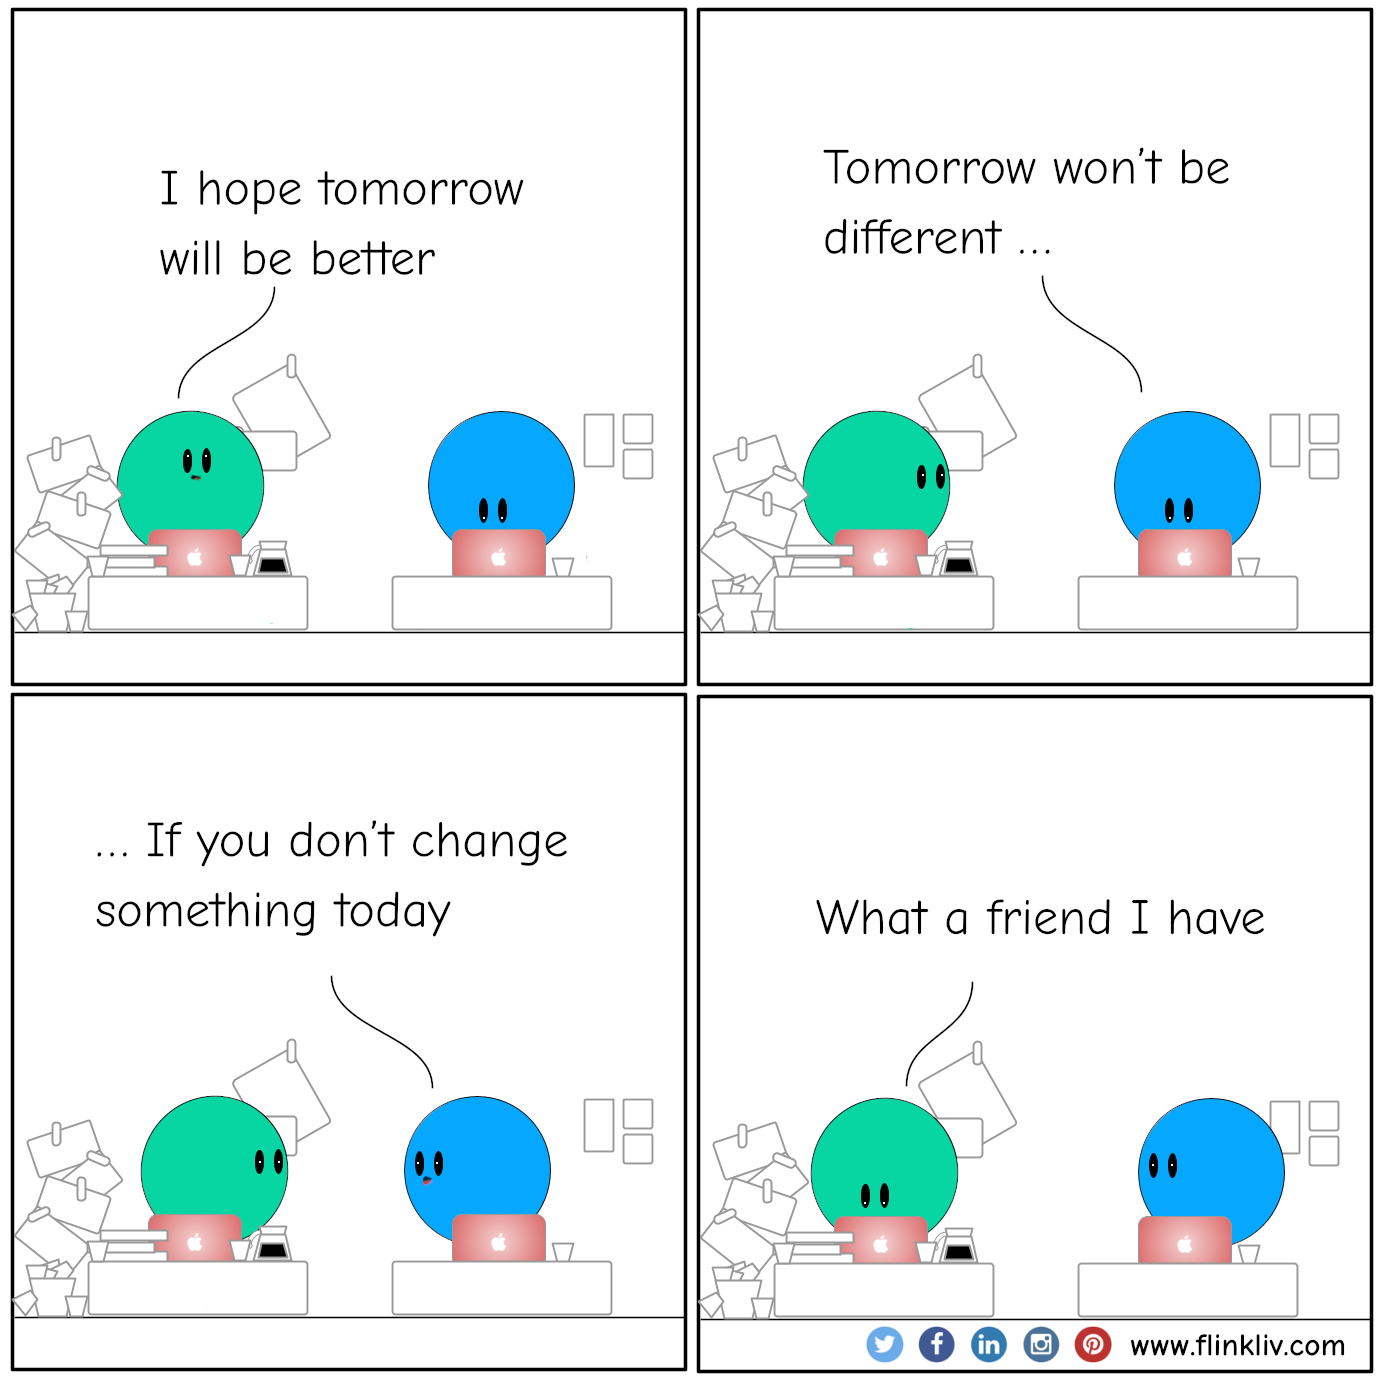 Conversation between A and B about Tomorrow won’t be different if you don’t change something today A: I hope tomorrow will be better B: Tomorrow won’t be different if you don’t change something today A: What a friend I have. By flinkliv.com